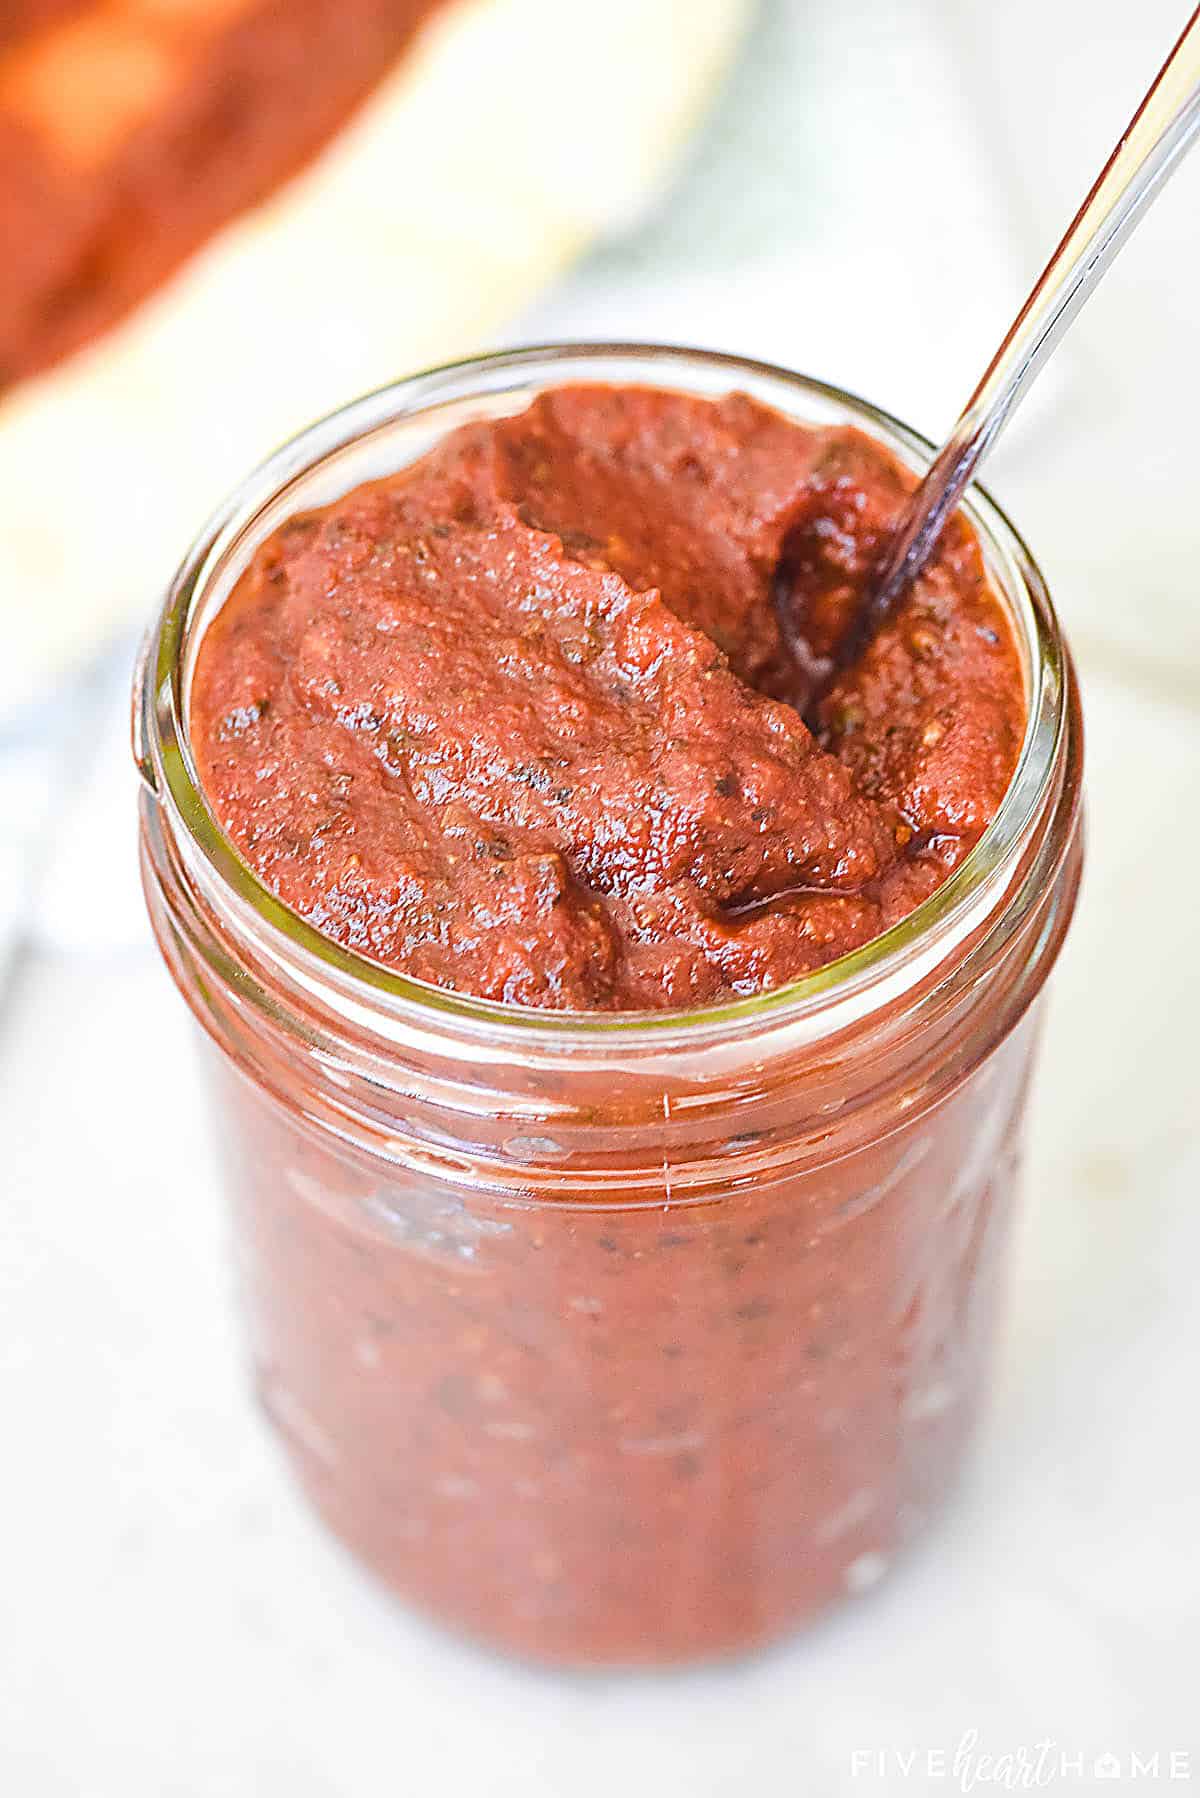 Jar of homemade Best Pizza Sauce with spoon.